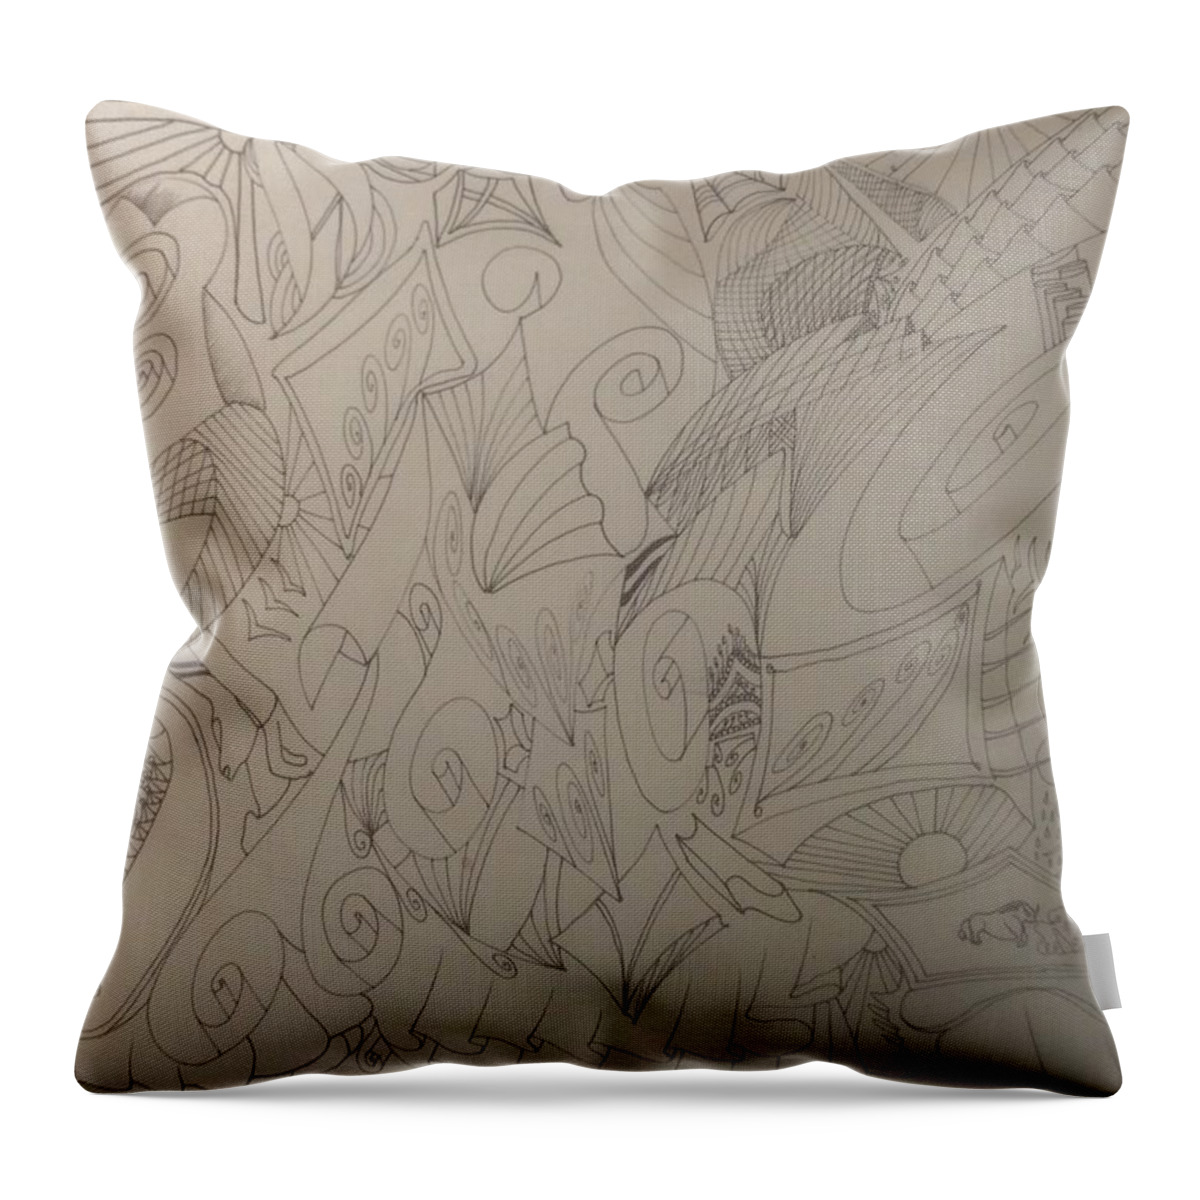 Wall Art Throw Pillow featuring the drawing Repair Relations by Callie E Austin